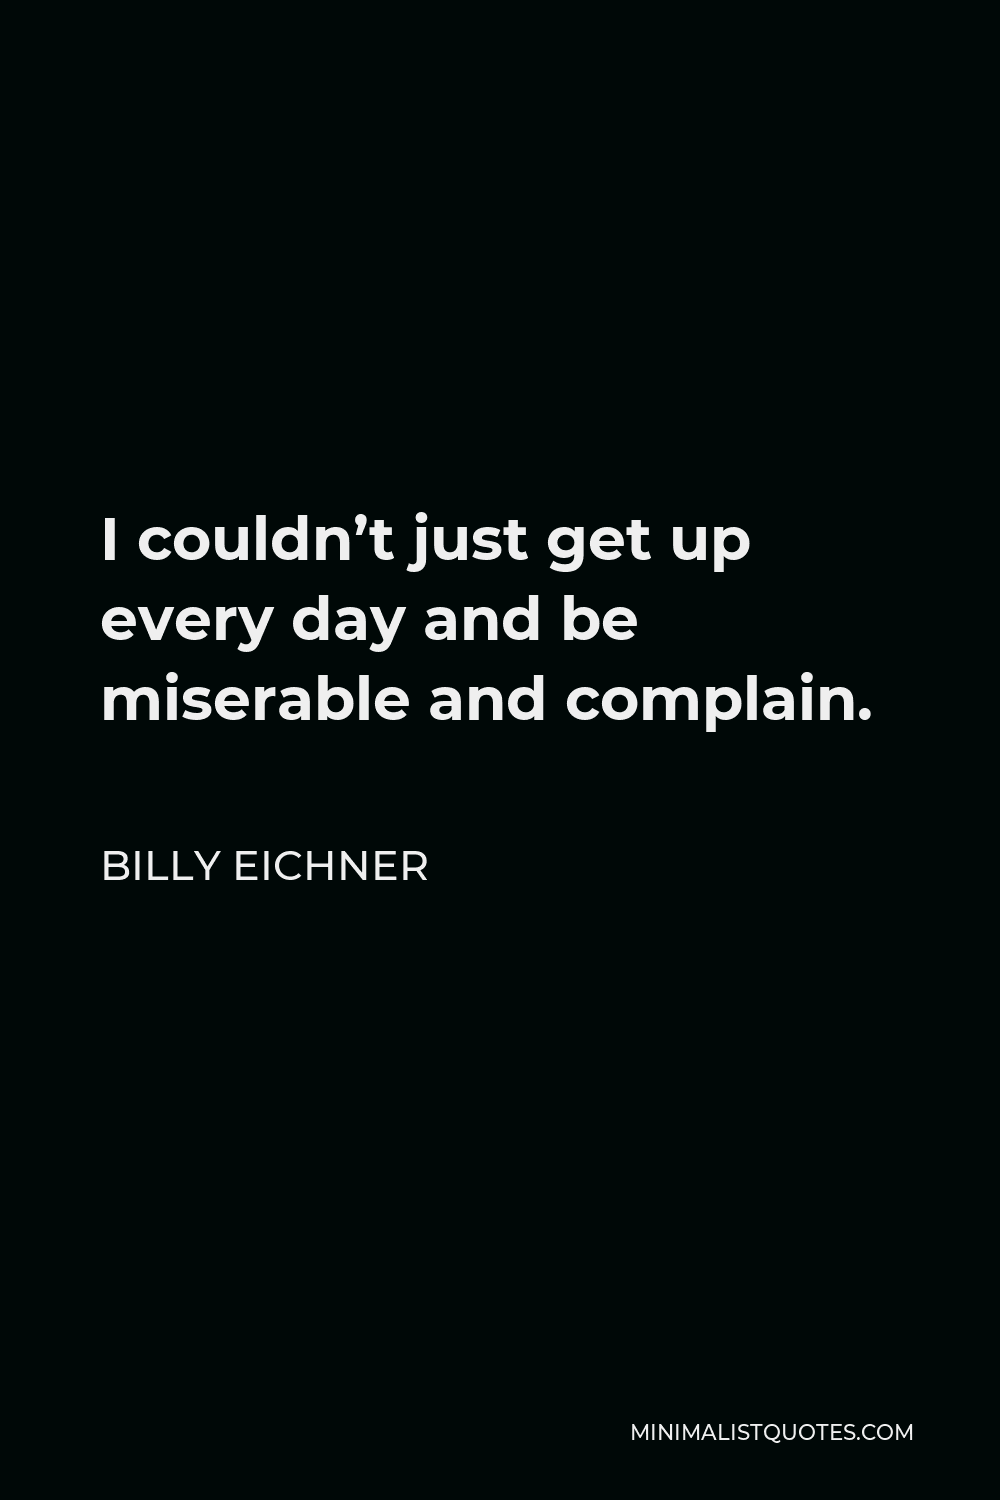 Billy Eichner Quote - I couldn’t just get up every day and be miserable and complain.